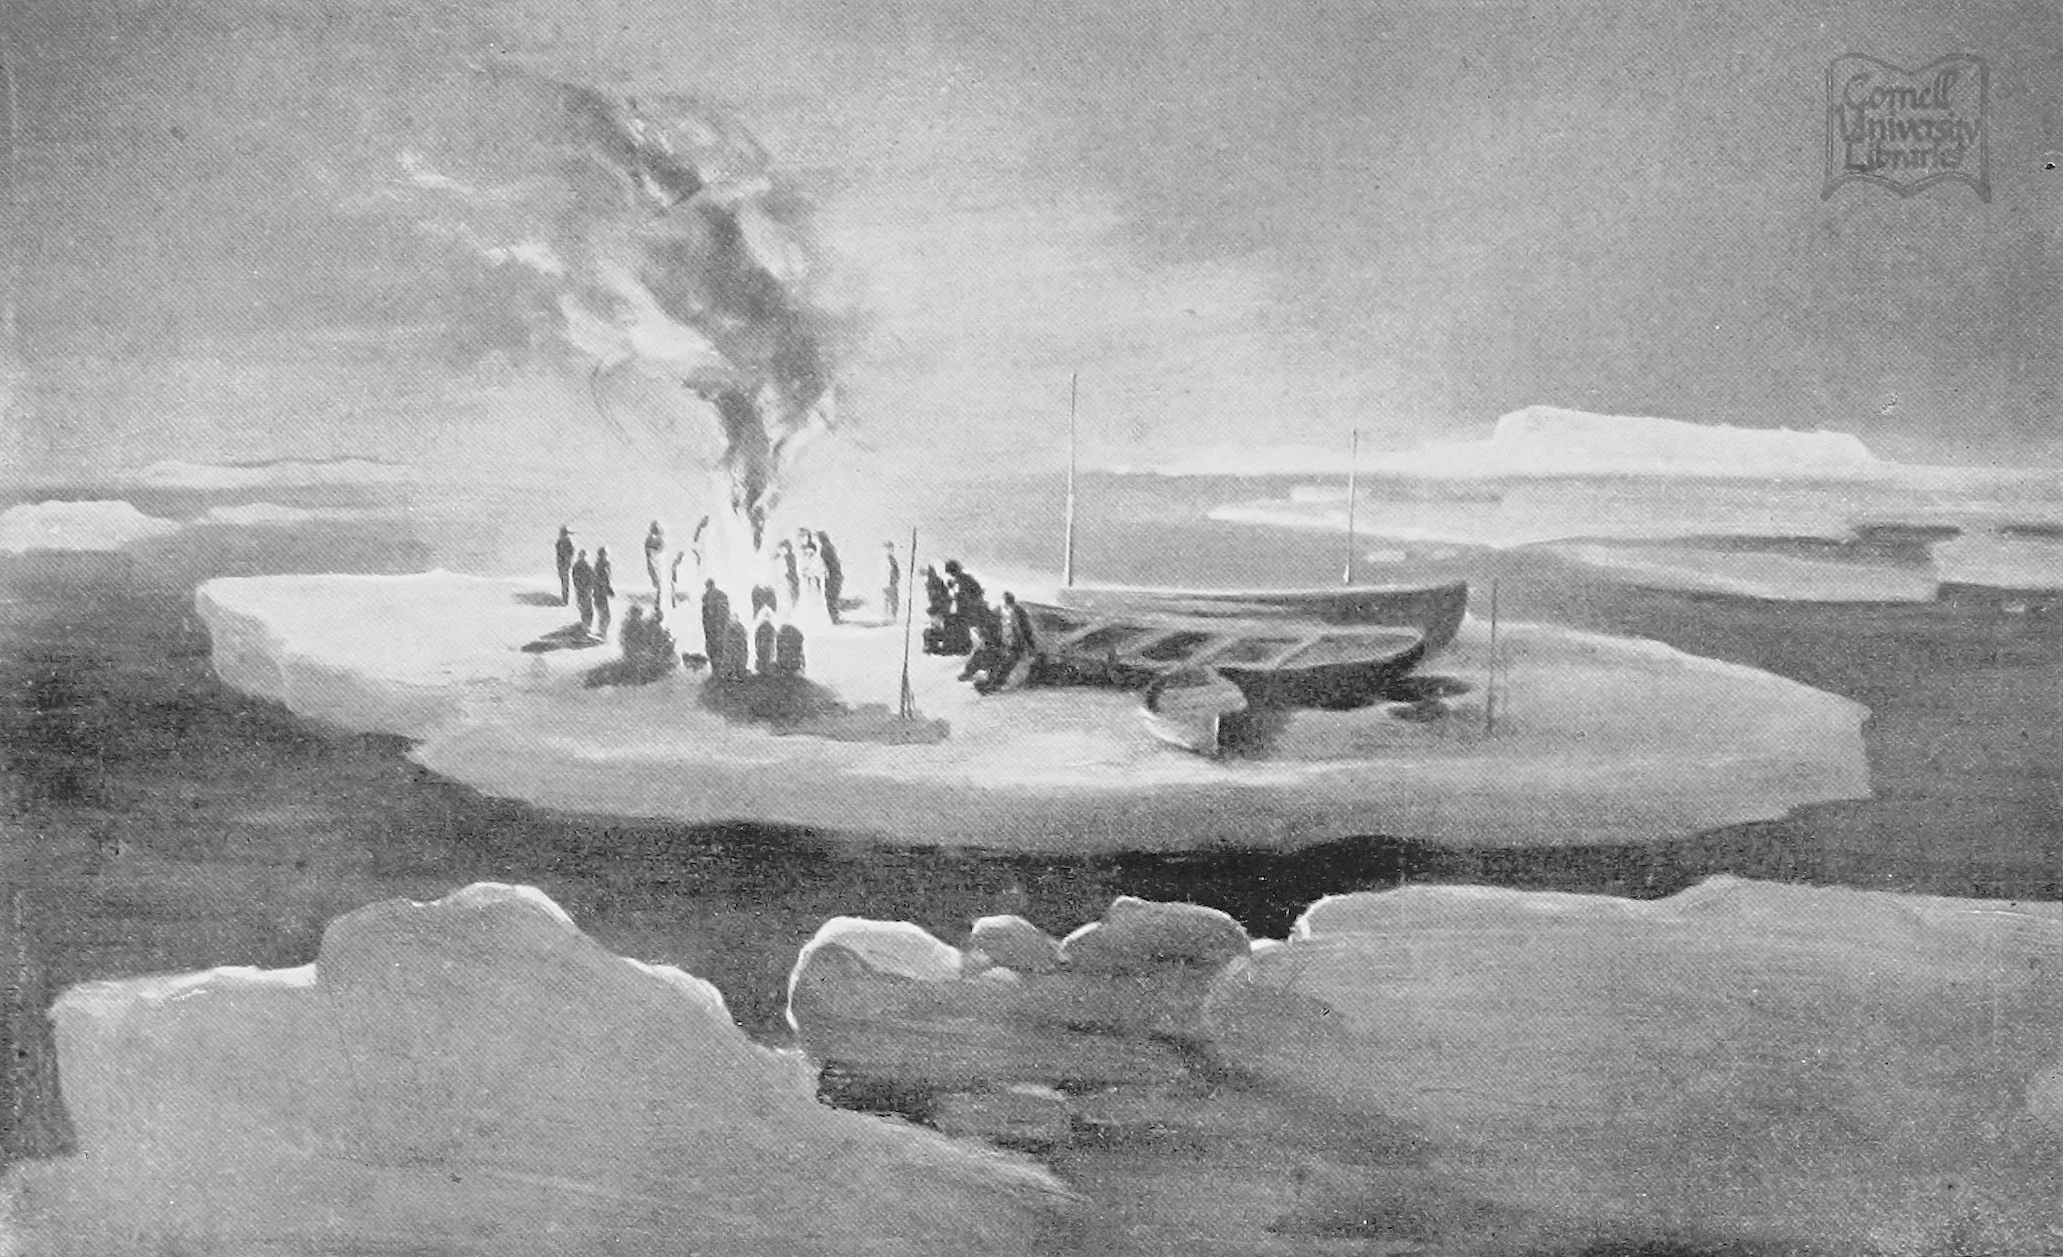 A drawing by George Marston, depicting a camp on an iceberg during the Endurance expedition to Antarctica, 1920. Via Wikimedia Commons